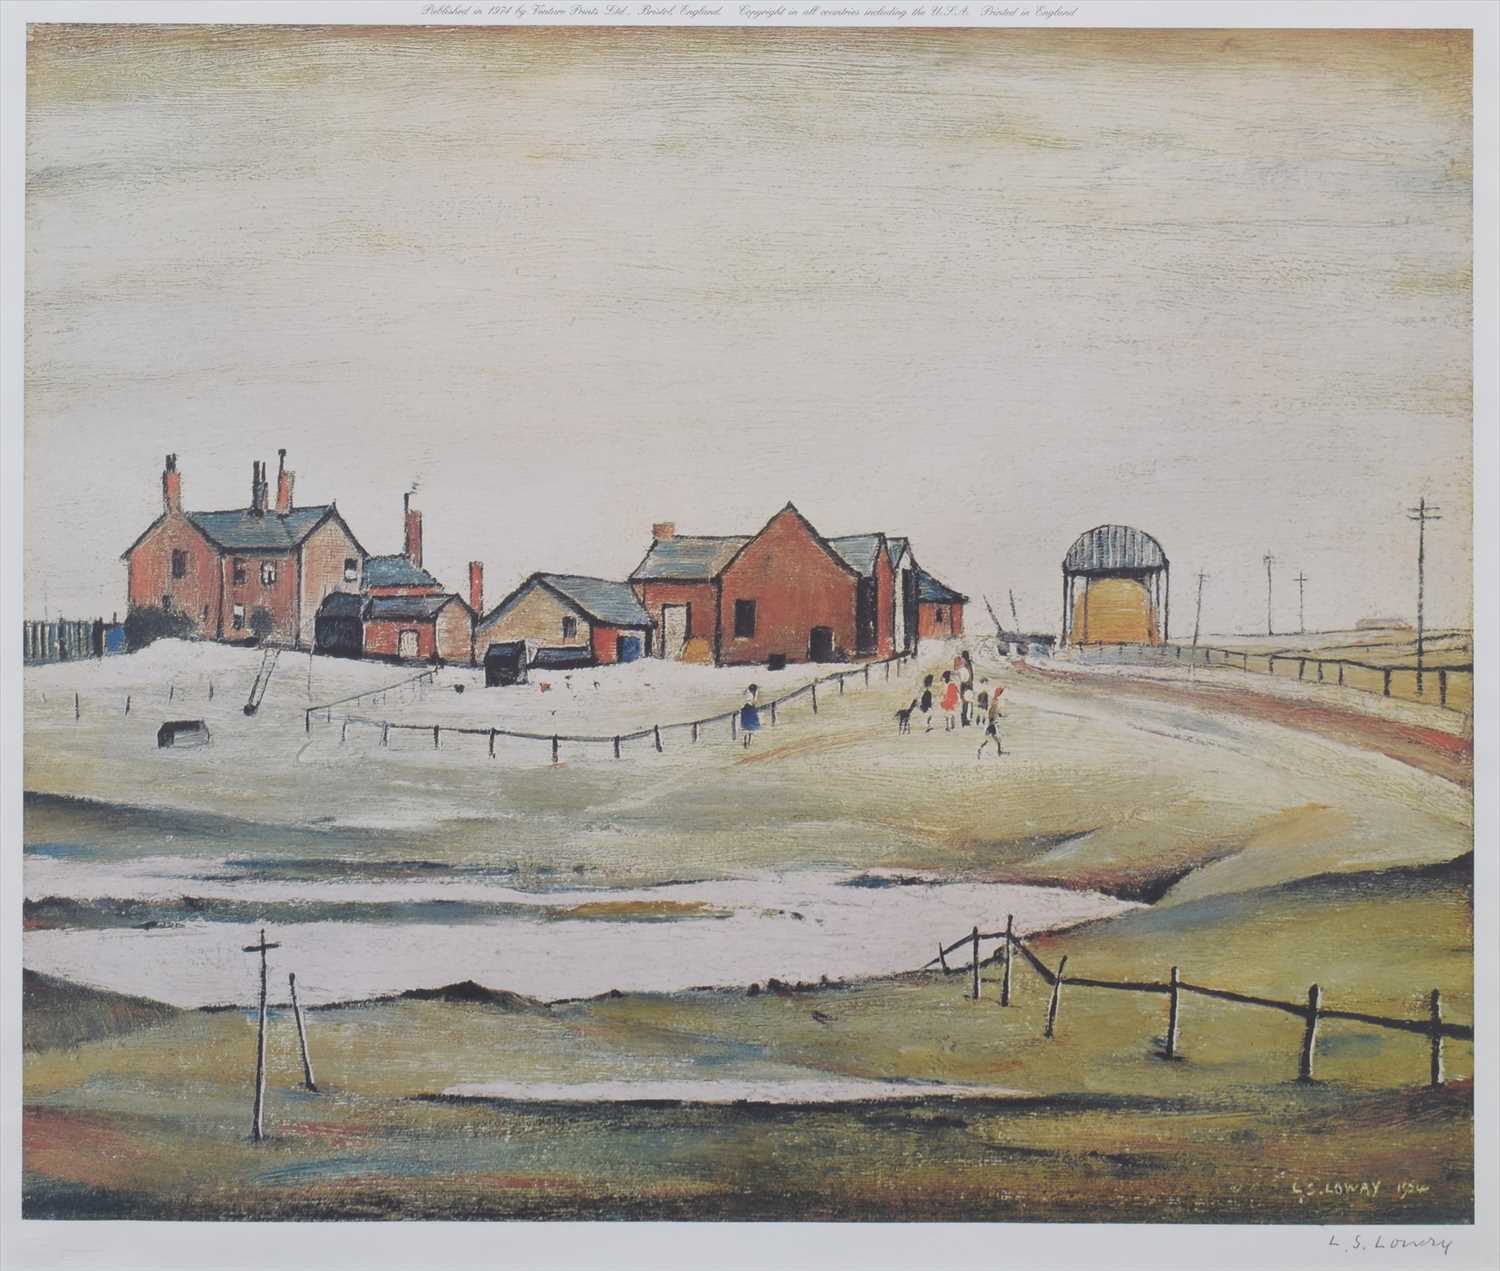 Lot 130 - After L.S. Lowry, "Landscape with Farm Buildings", signed print.